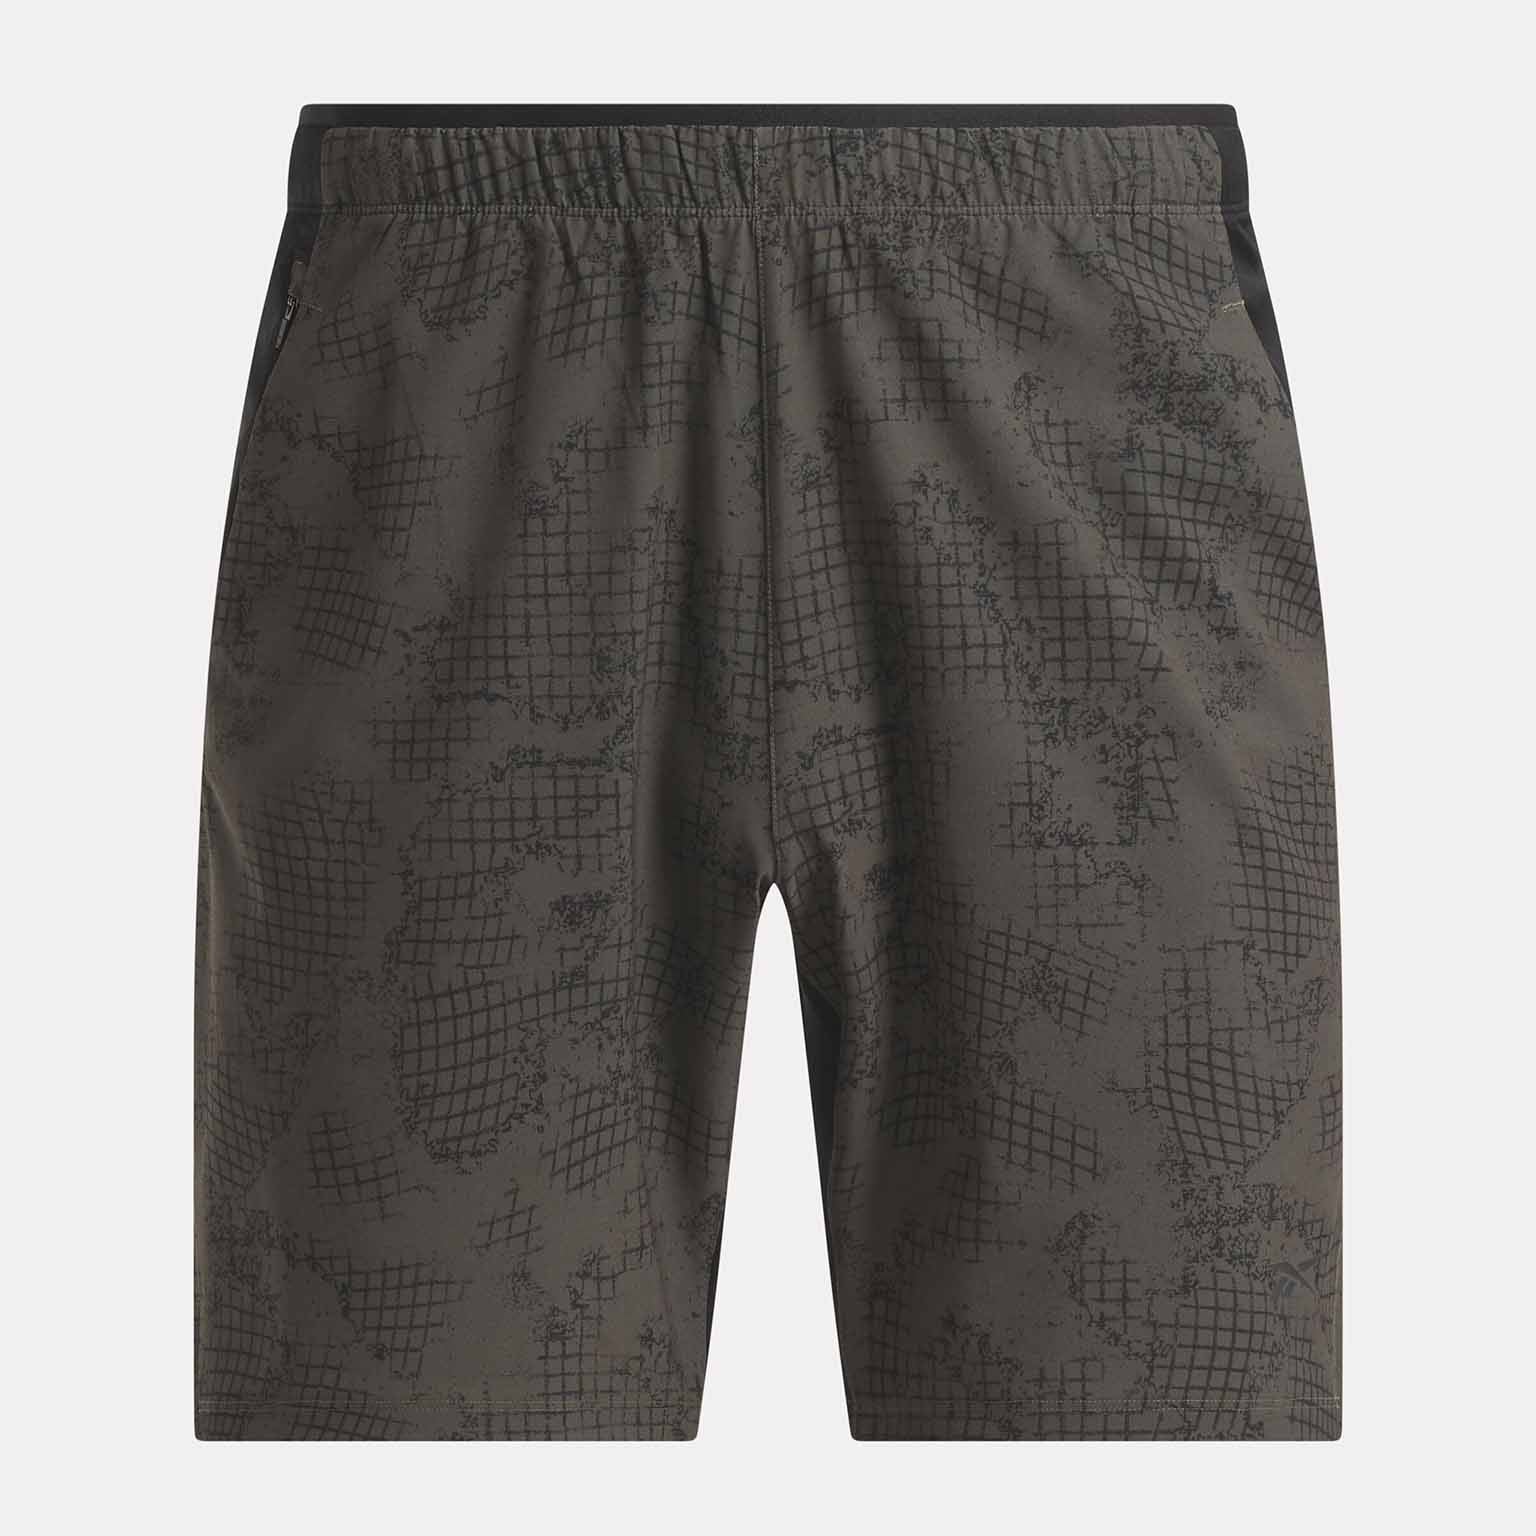 Strength 3.0 All-over Print Shorts